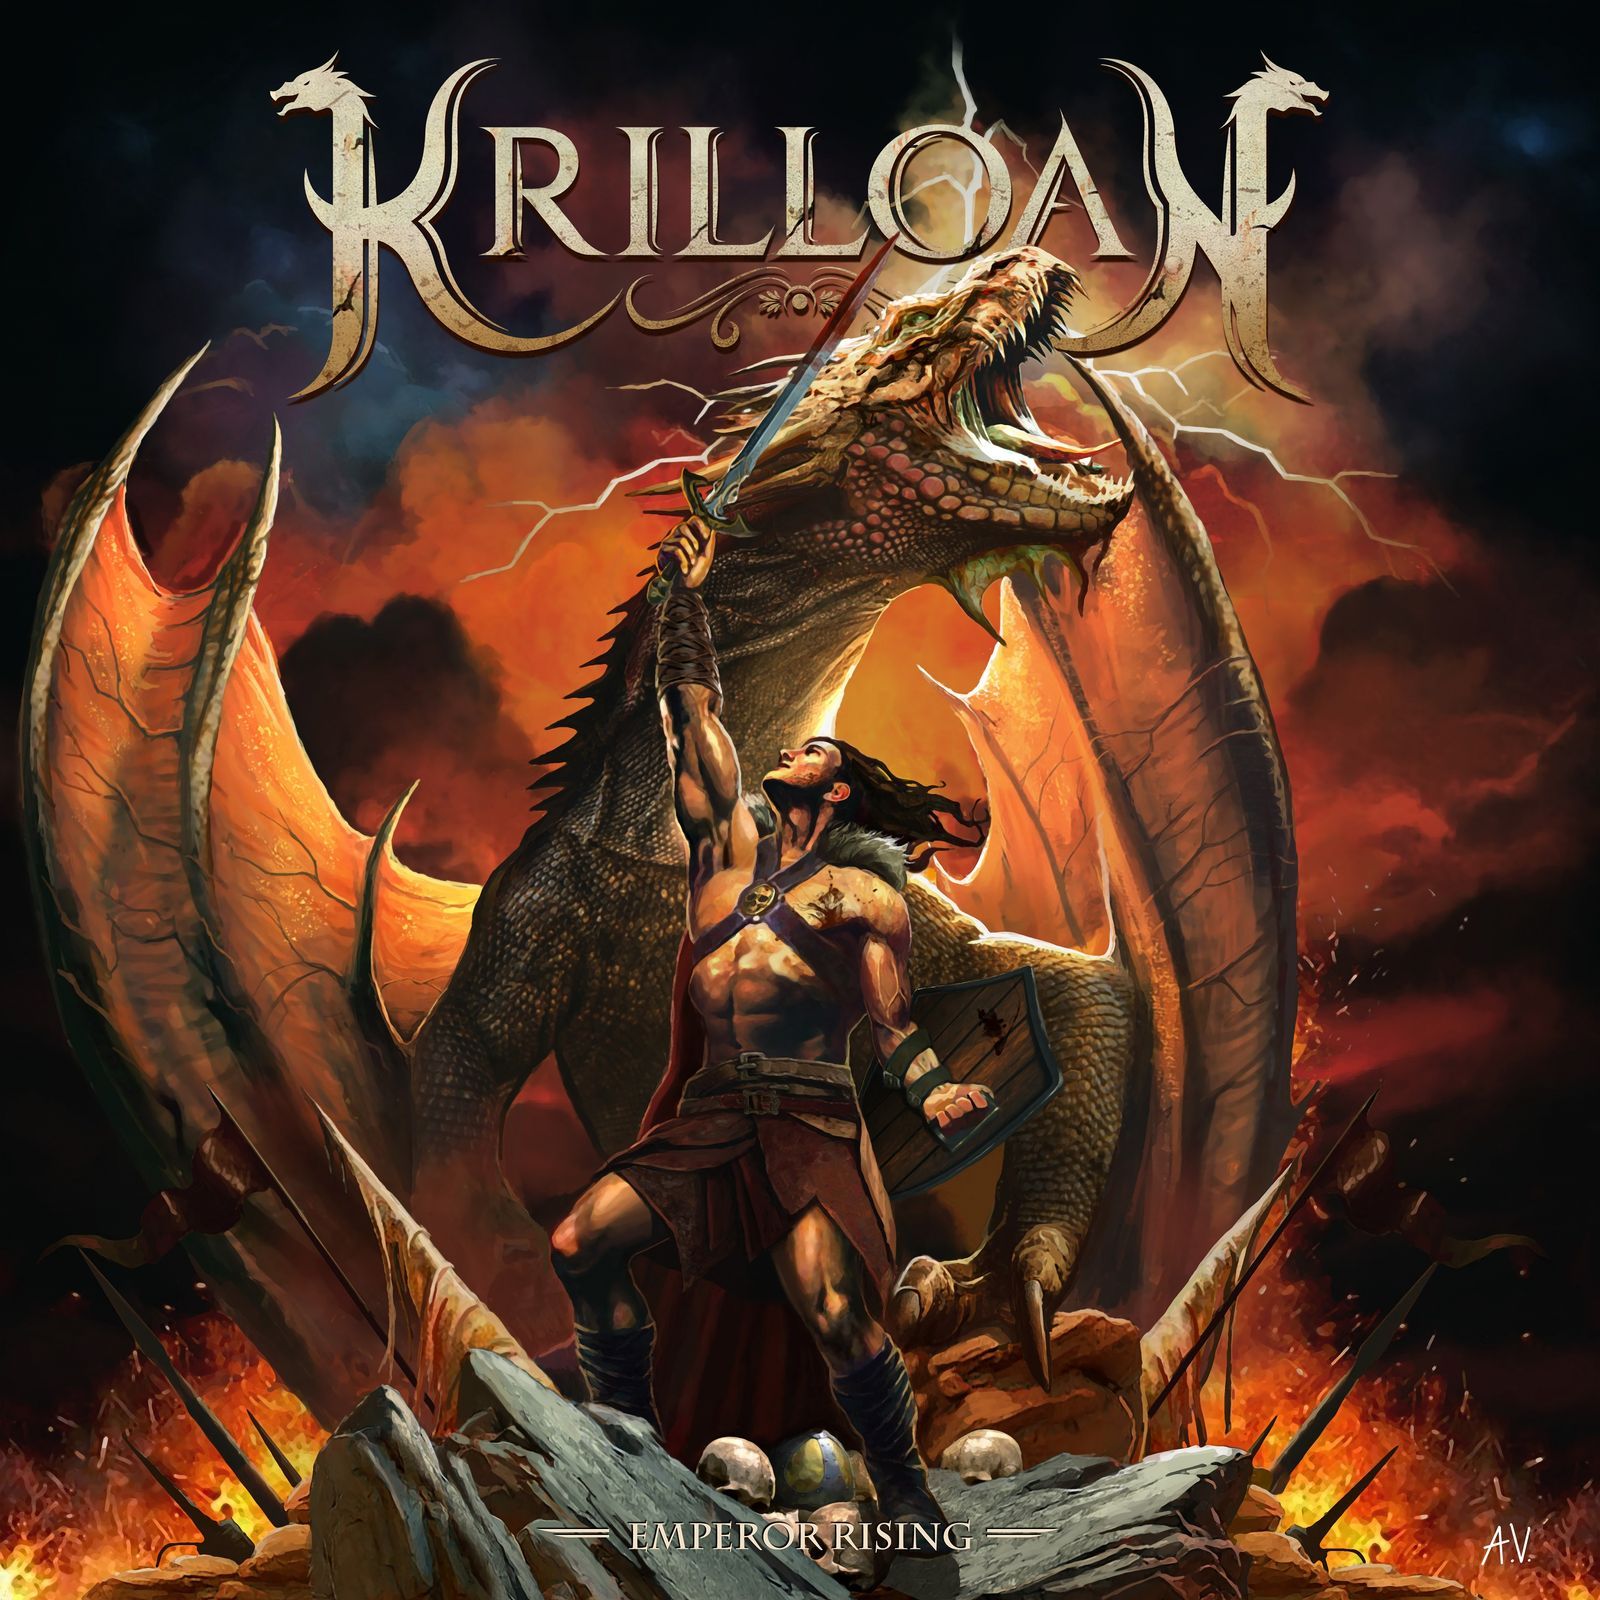 Krilloan - Sons of the Lion (lyric video)